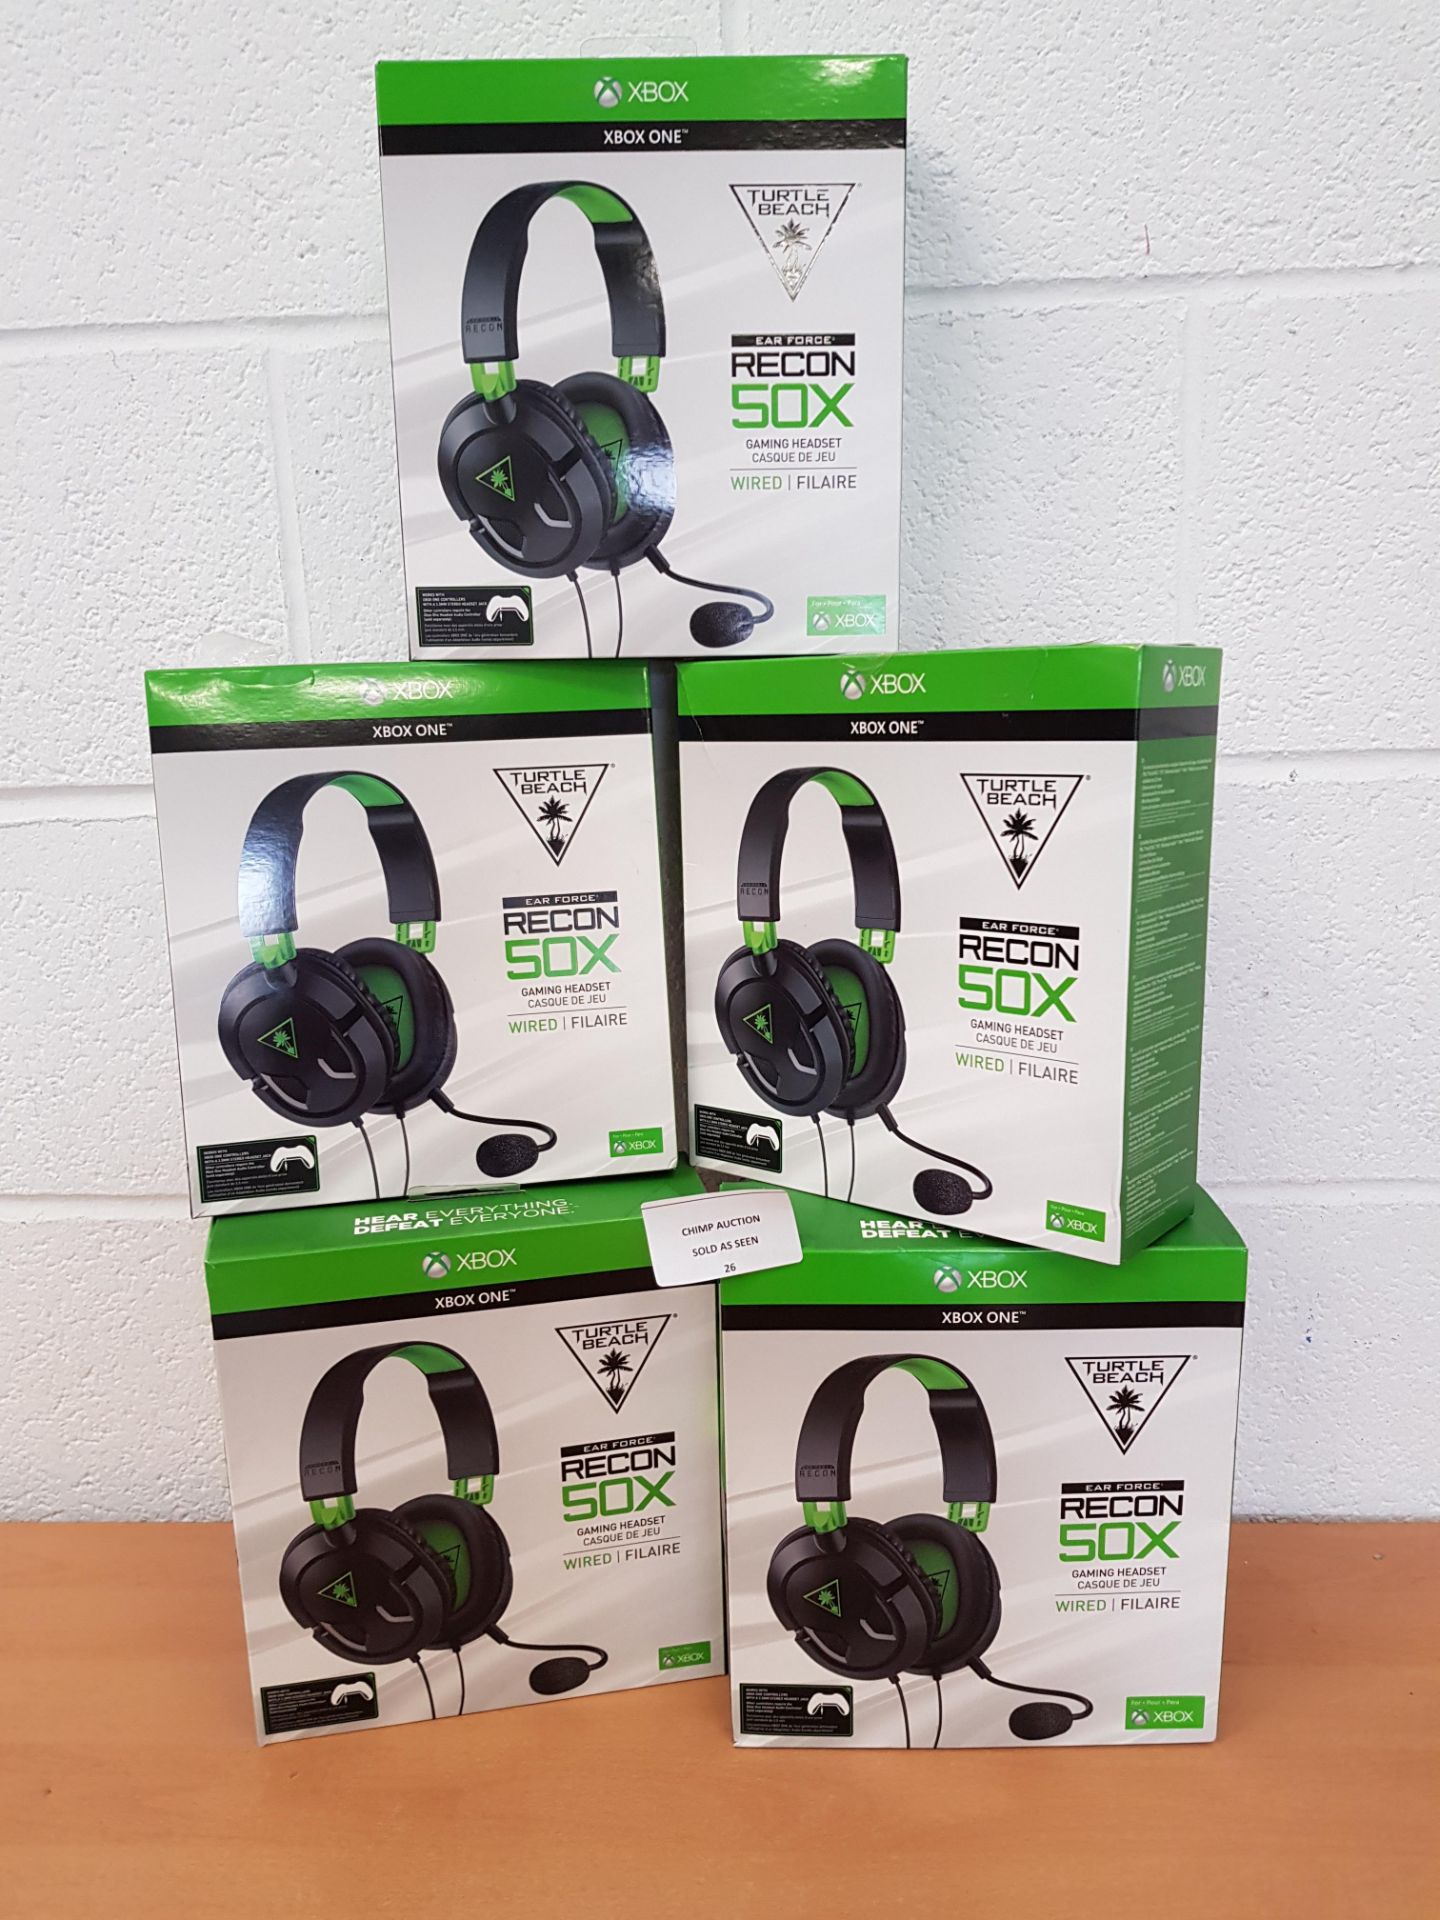 Joblot of 5X TurtleBeach Recon 50X Xbox One gaming headsets RRP £300.